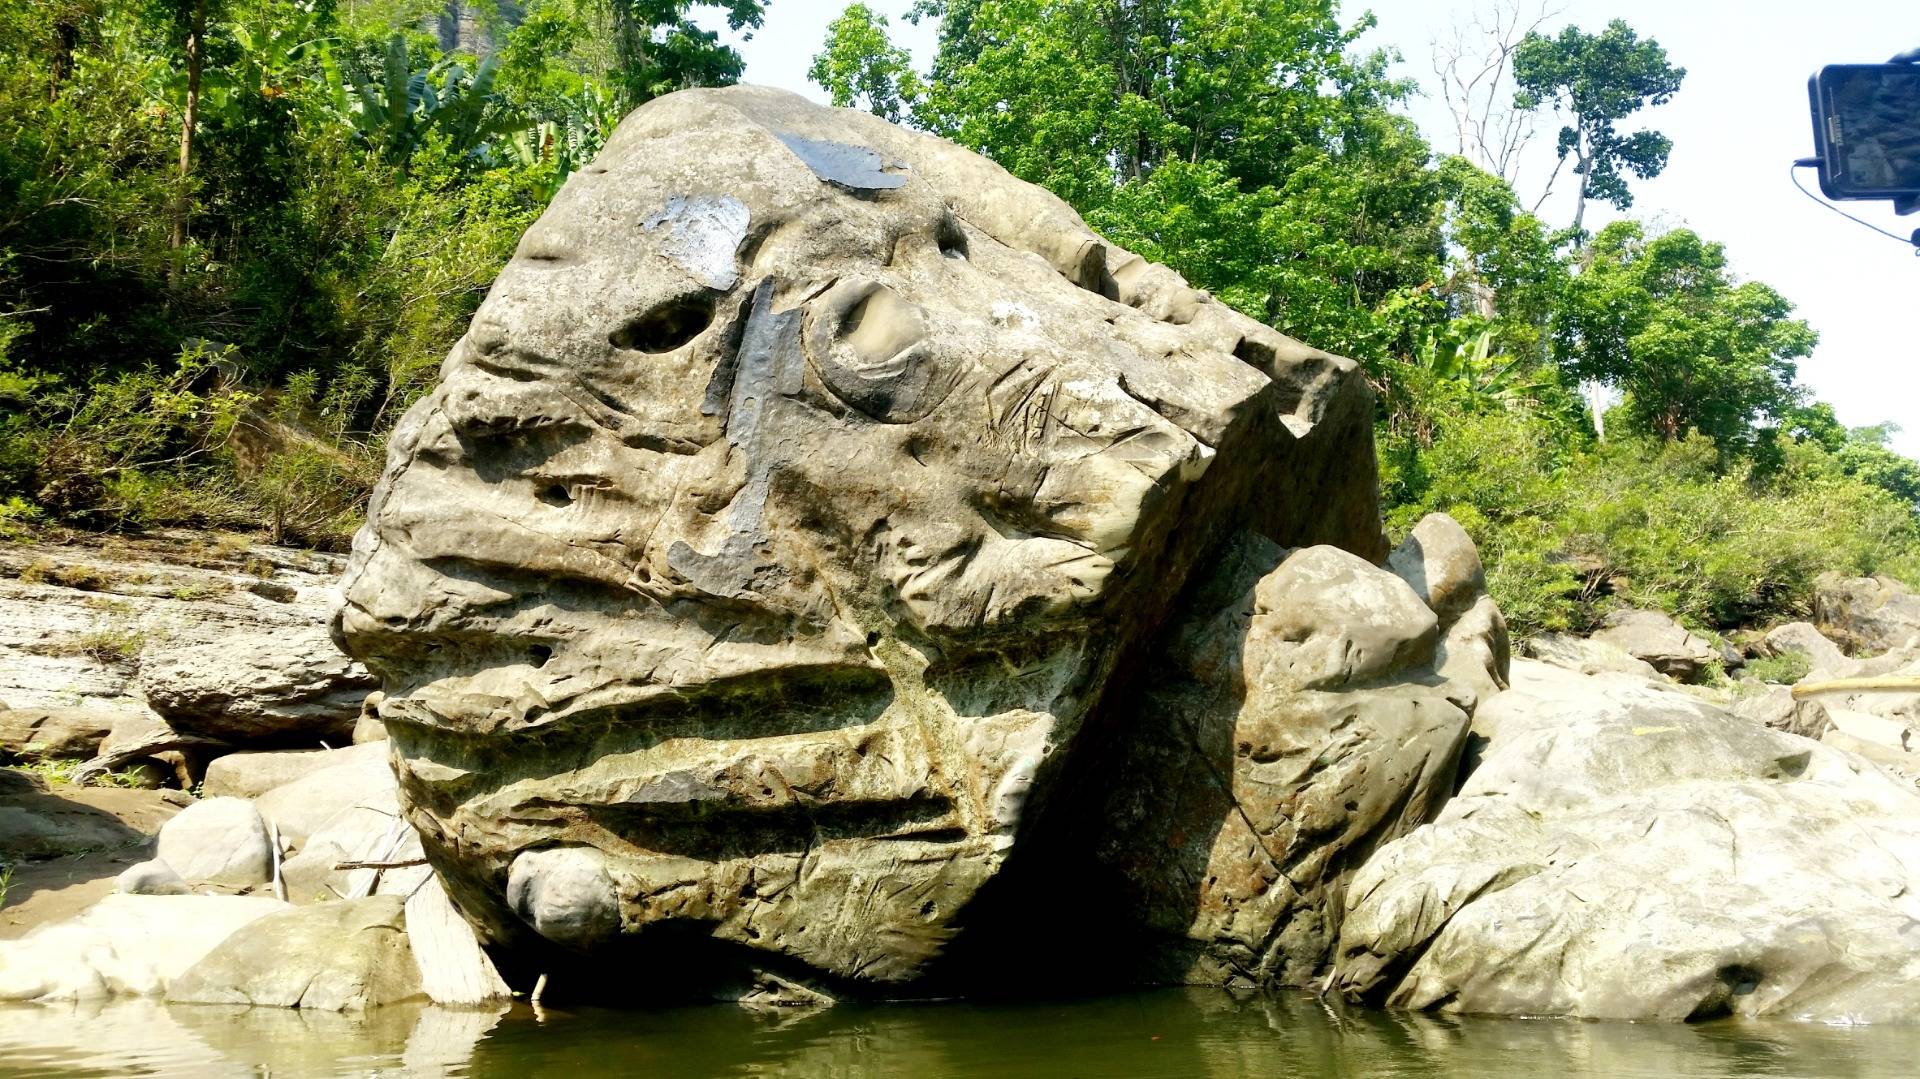 ”Baro Pathor” or King Rock would be the name of this due to the appearance of the rock!